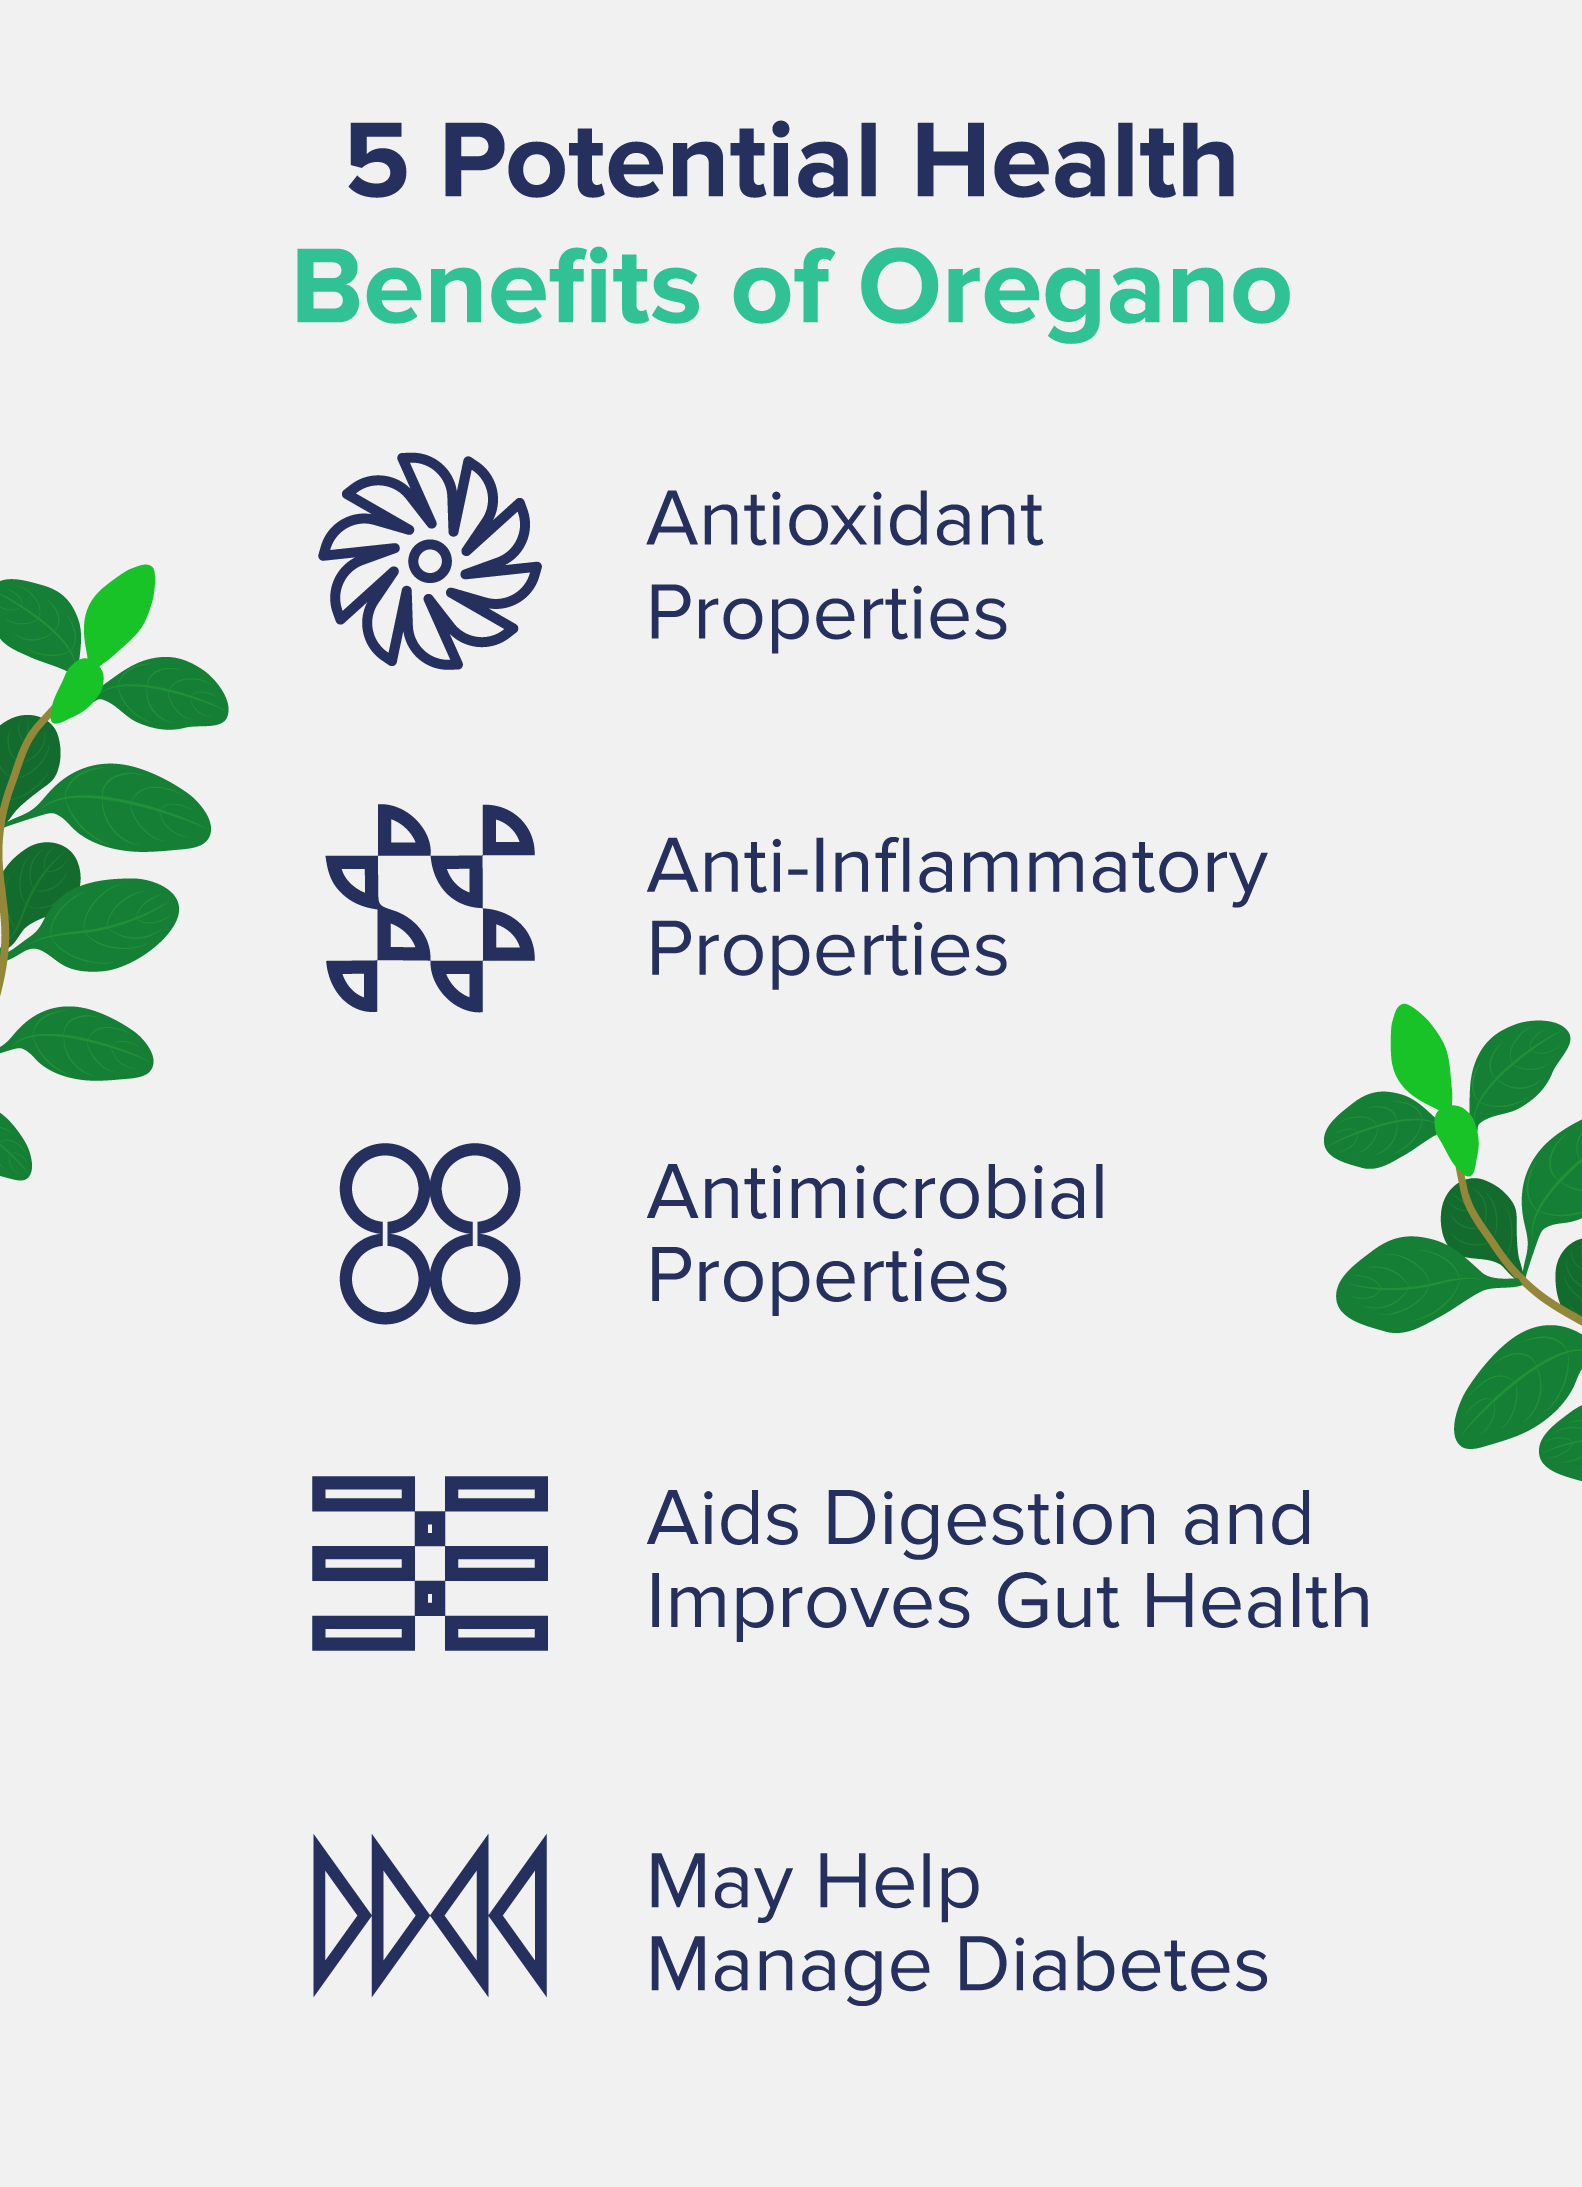 A graphic entitled "5 Potential Health Benefits of Oregano," listing benefits like "antioxidant properties" and "antimicrobial properties" alongside corresponding icons.